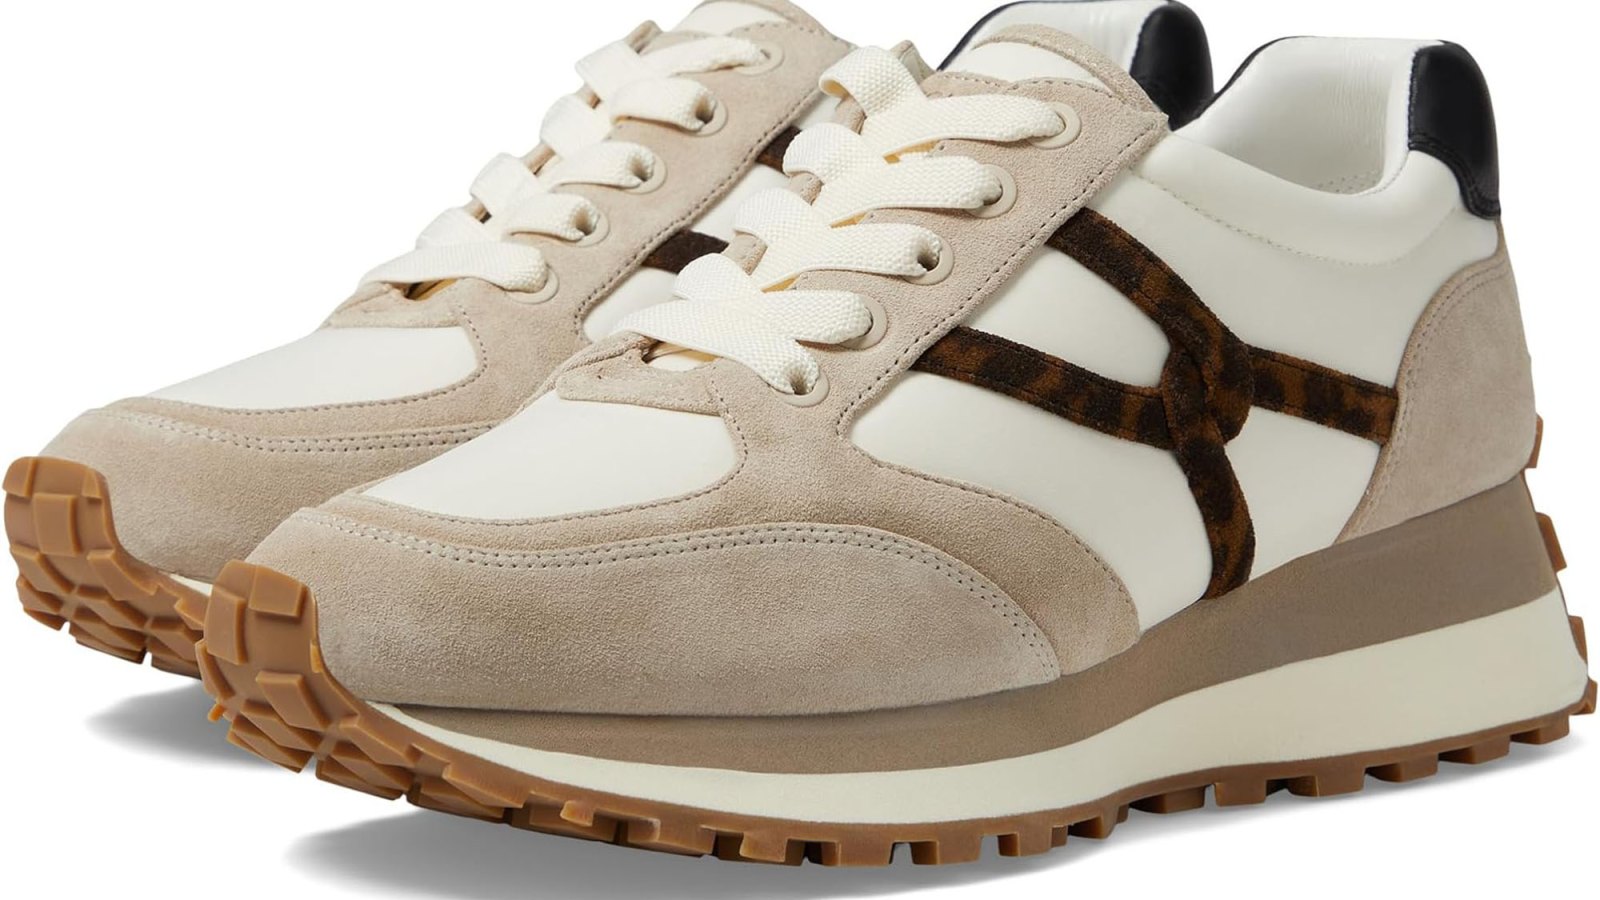 Most Stylish Walking Shoes on Zappos